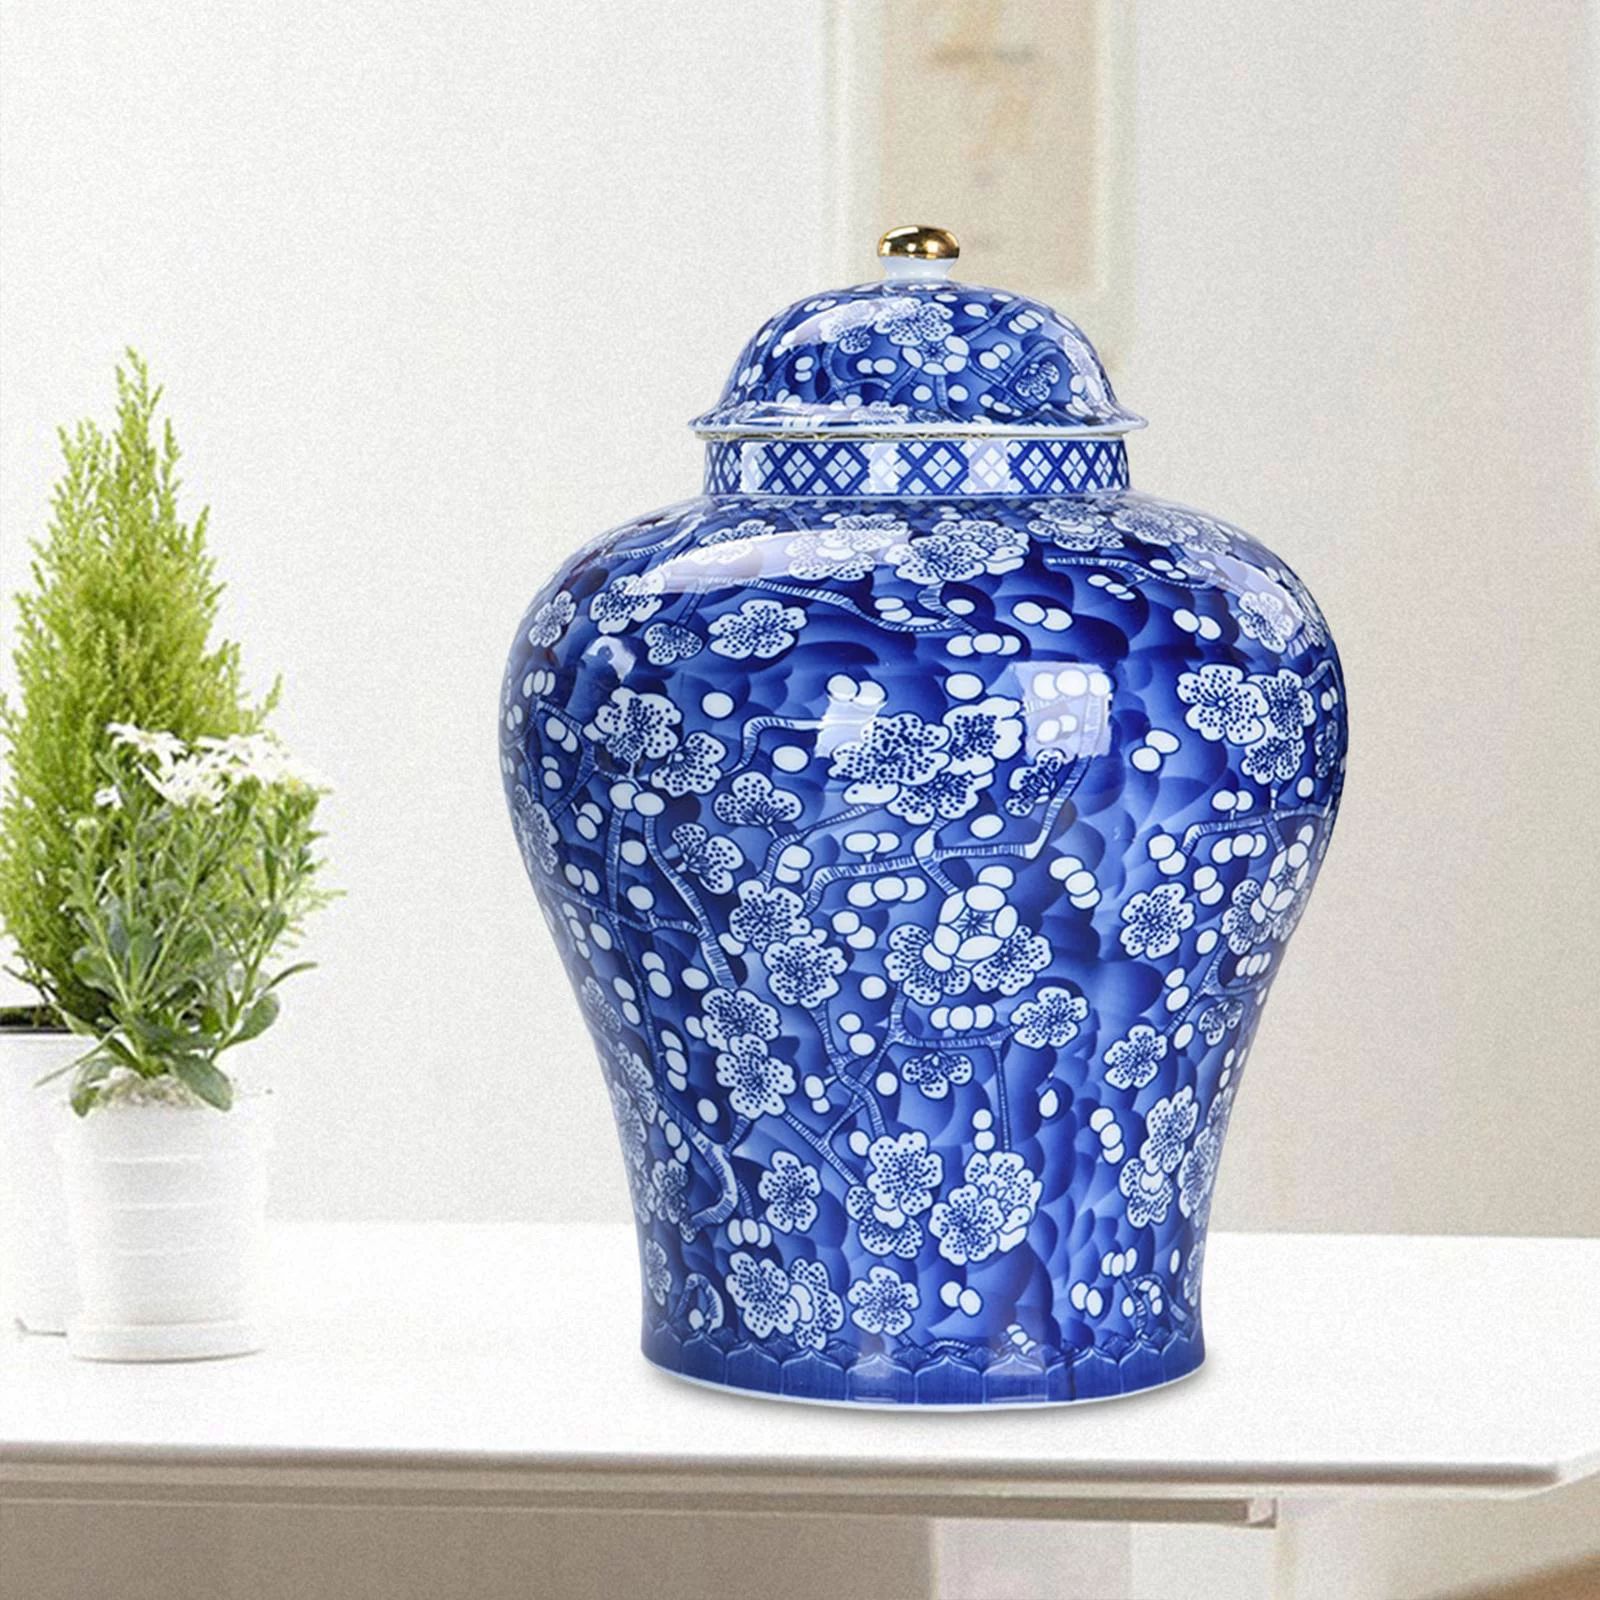 Chinese Plum Blossom Porcelain Ginger Jar with Lid Blue and White Beautiful | Walmart (US)